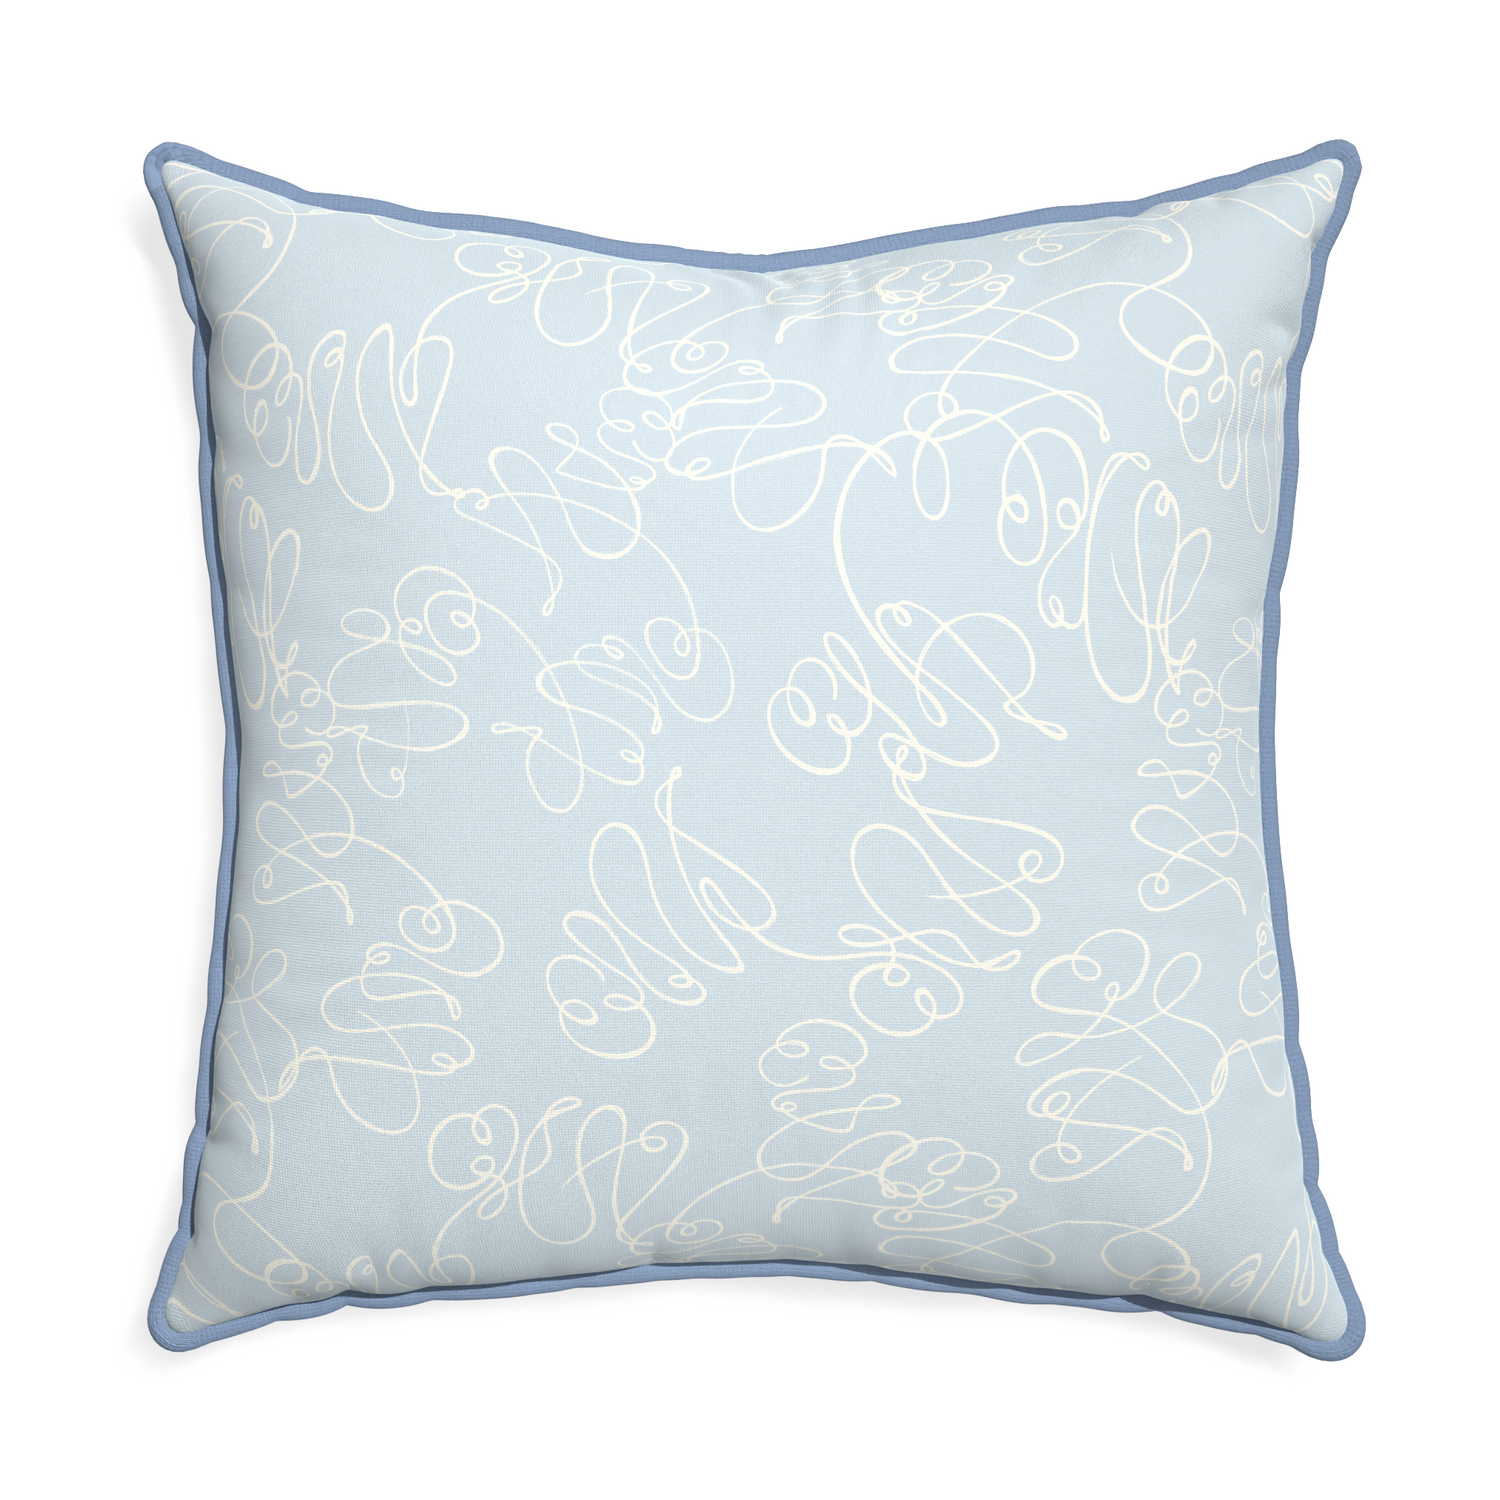 Euro-sham mirabella custom powder blue abstractpillow with sky piping on white background